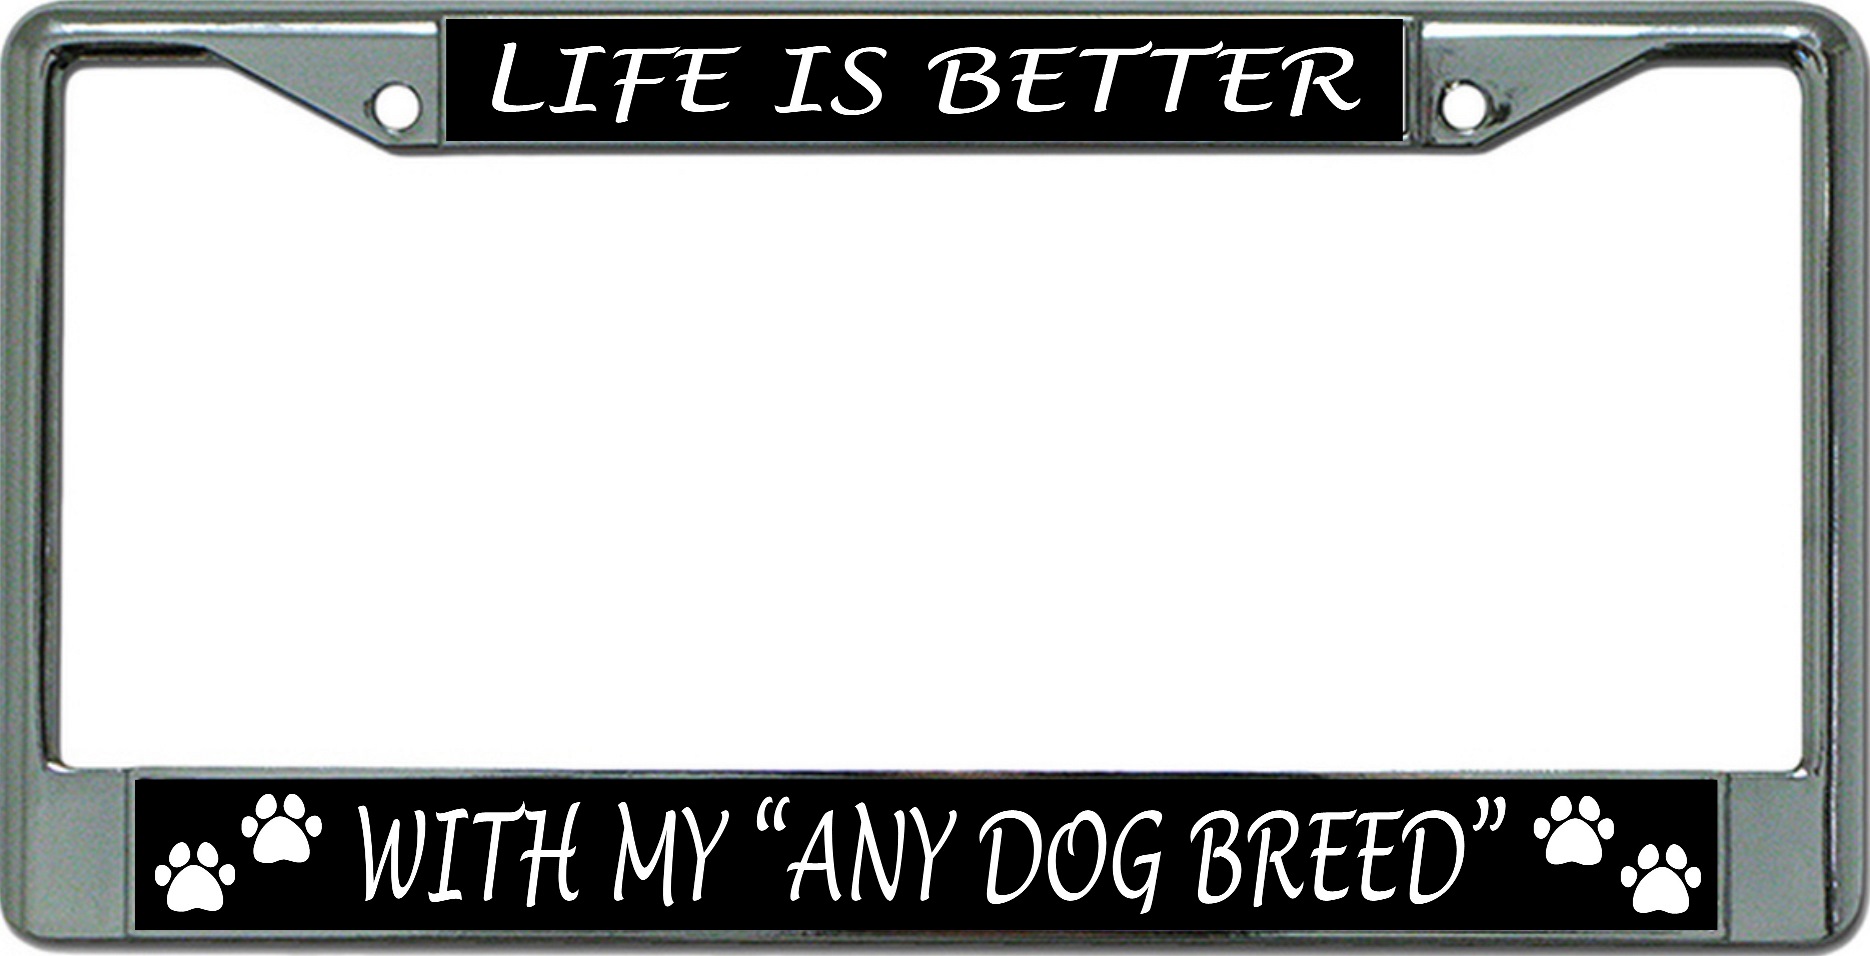 ''Life Is Better With My ''''Any Dog Breed'''' Chrome License Plate FRAME''